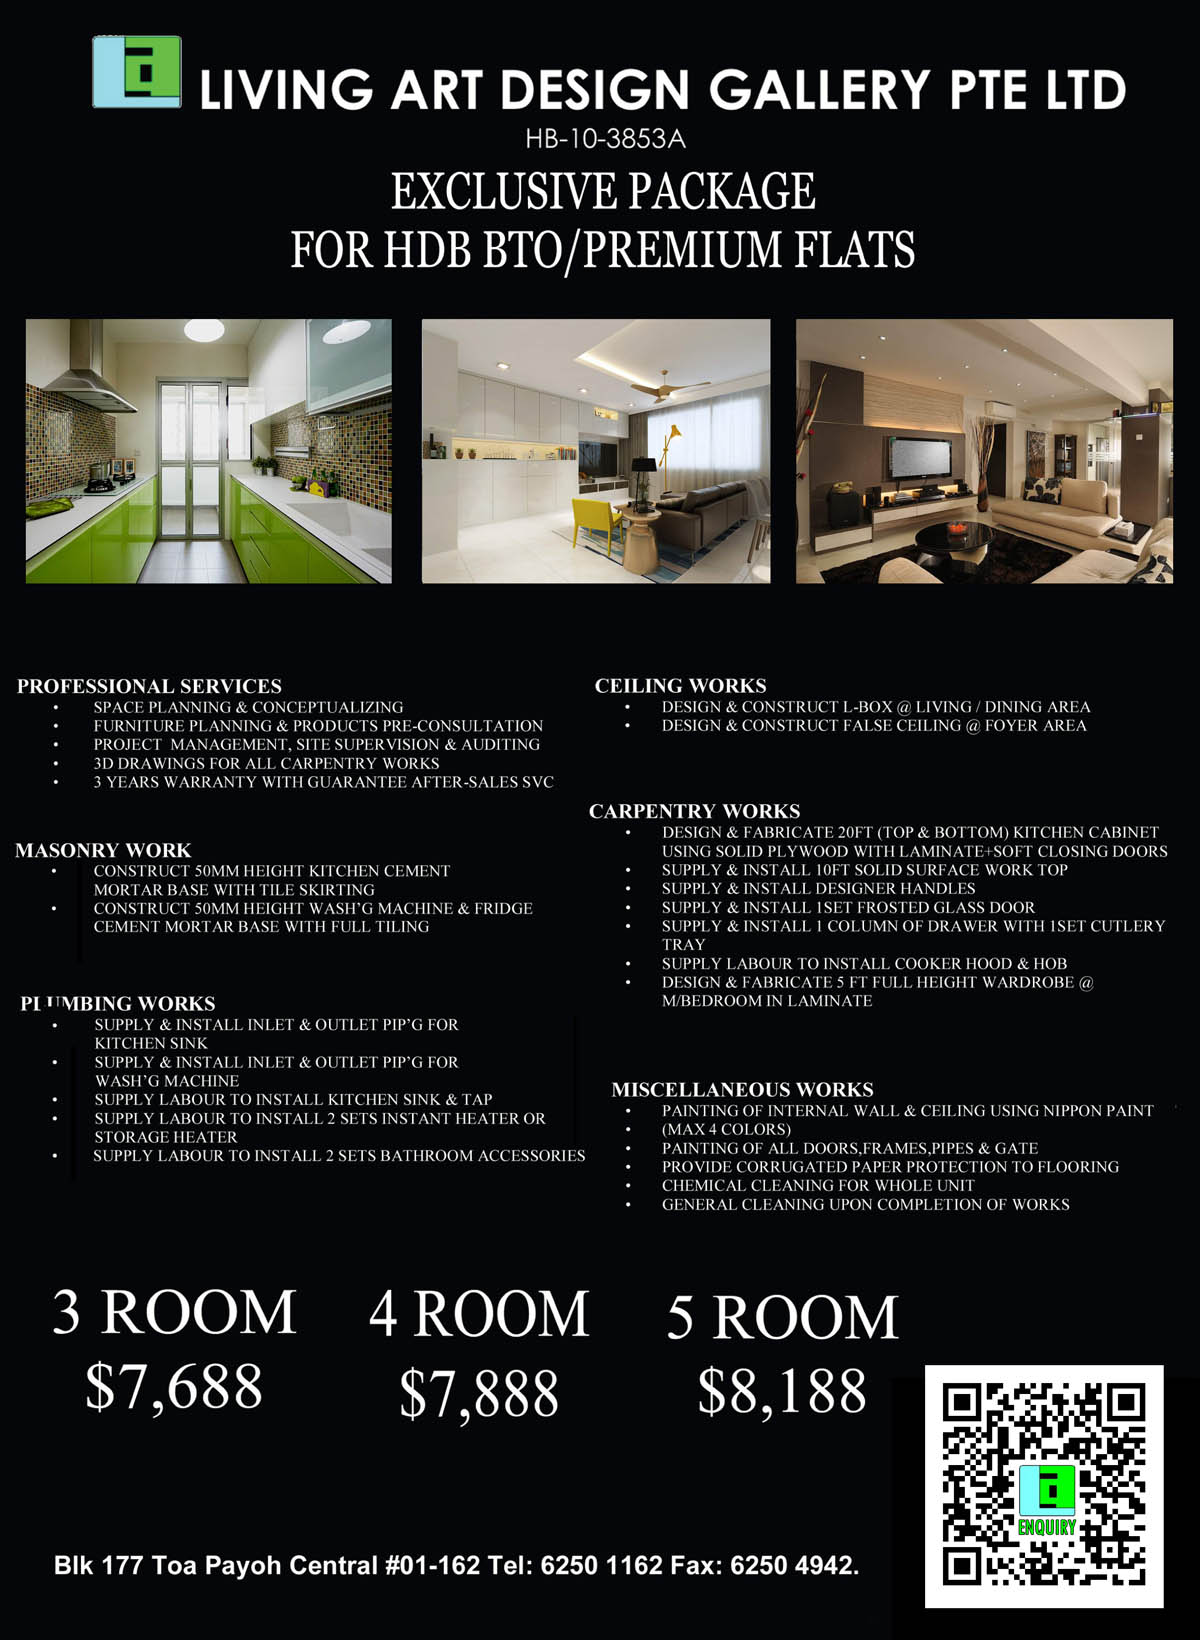 Package 3: HDB BTO / Premium Exclusive Package for HDB New Flats $7,688